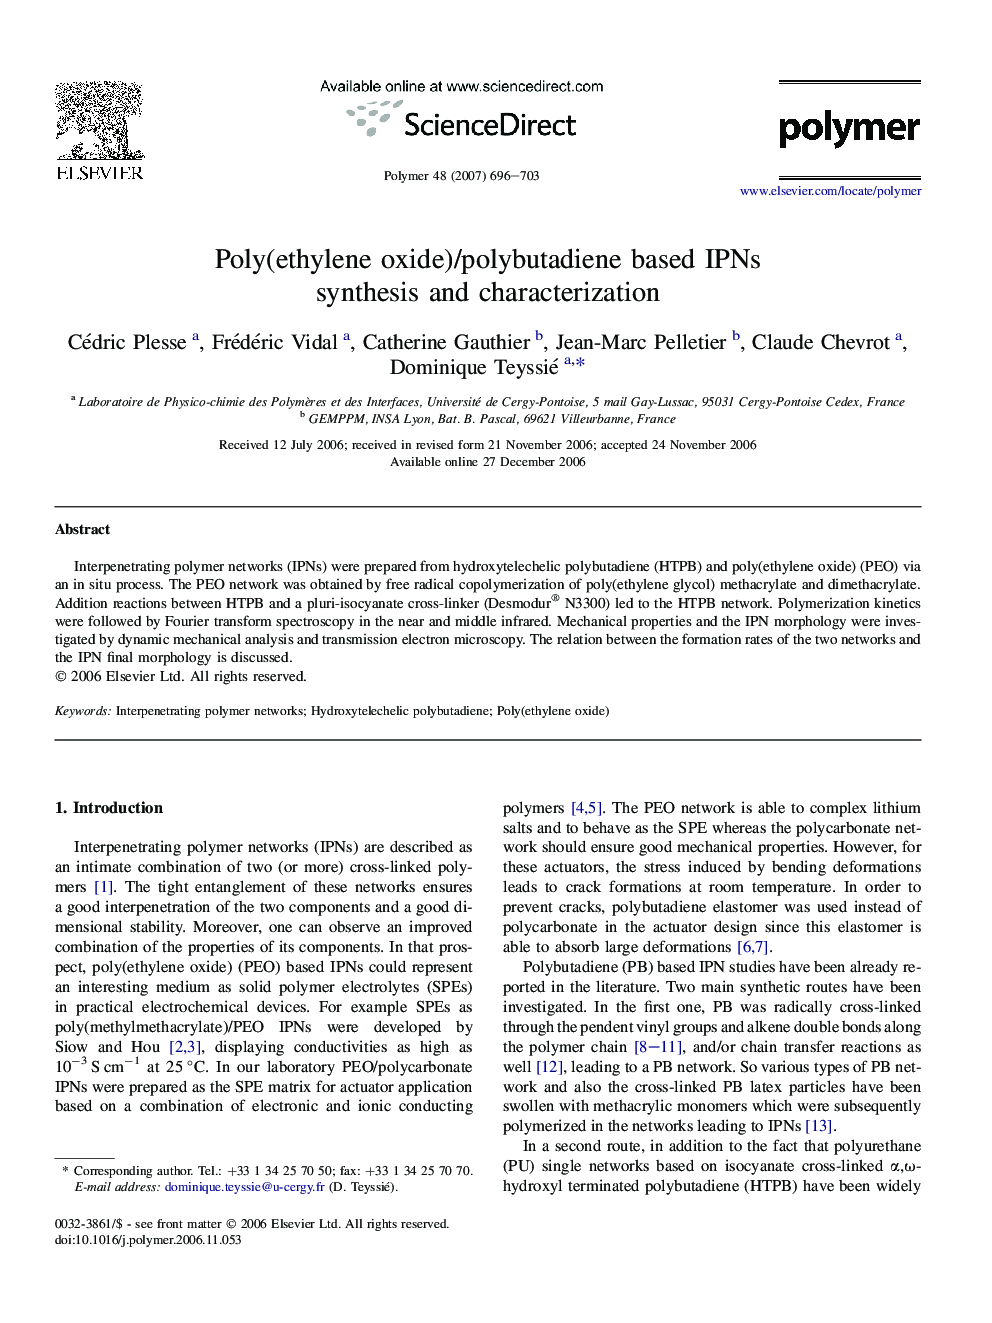 Poly(ethylene oxide)/polybutadiene based IPNs synthesis and characterization